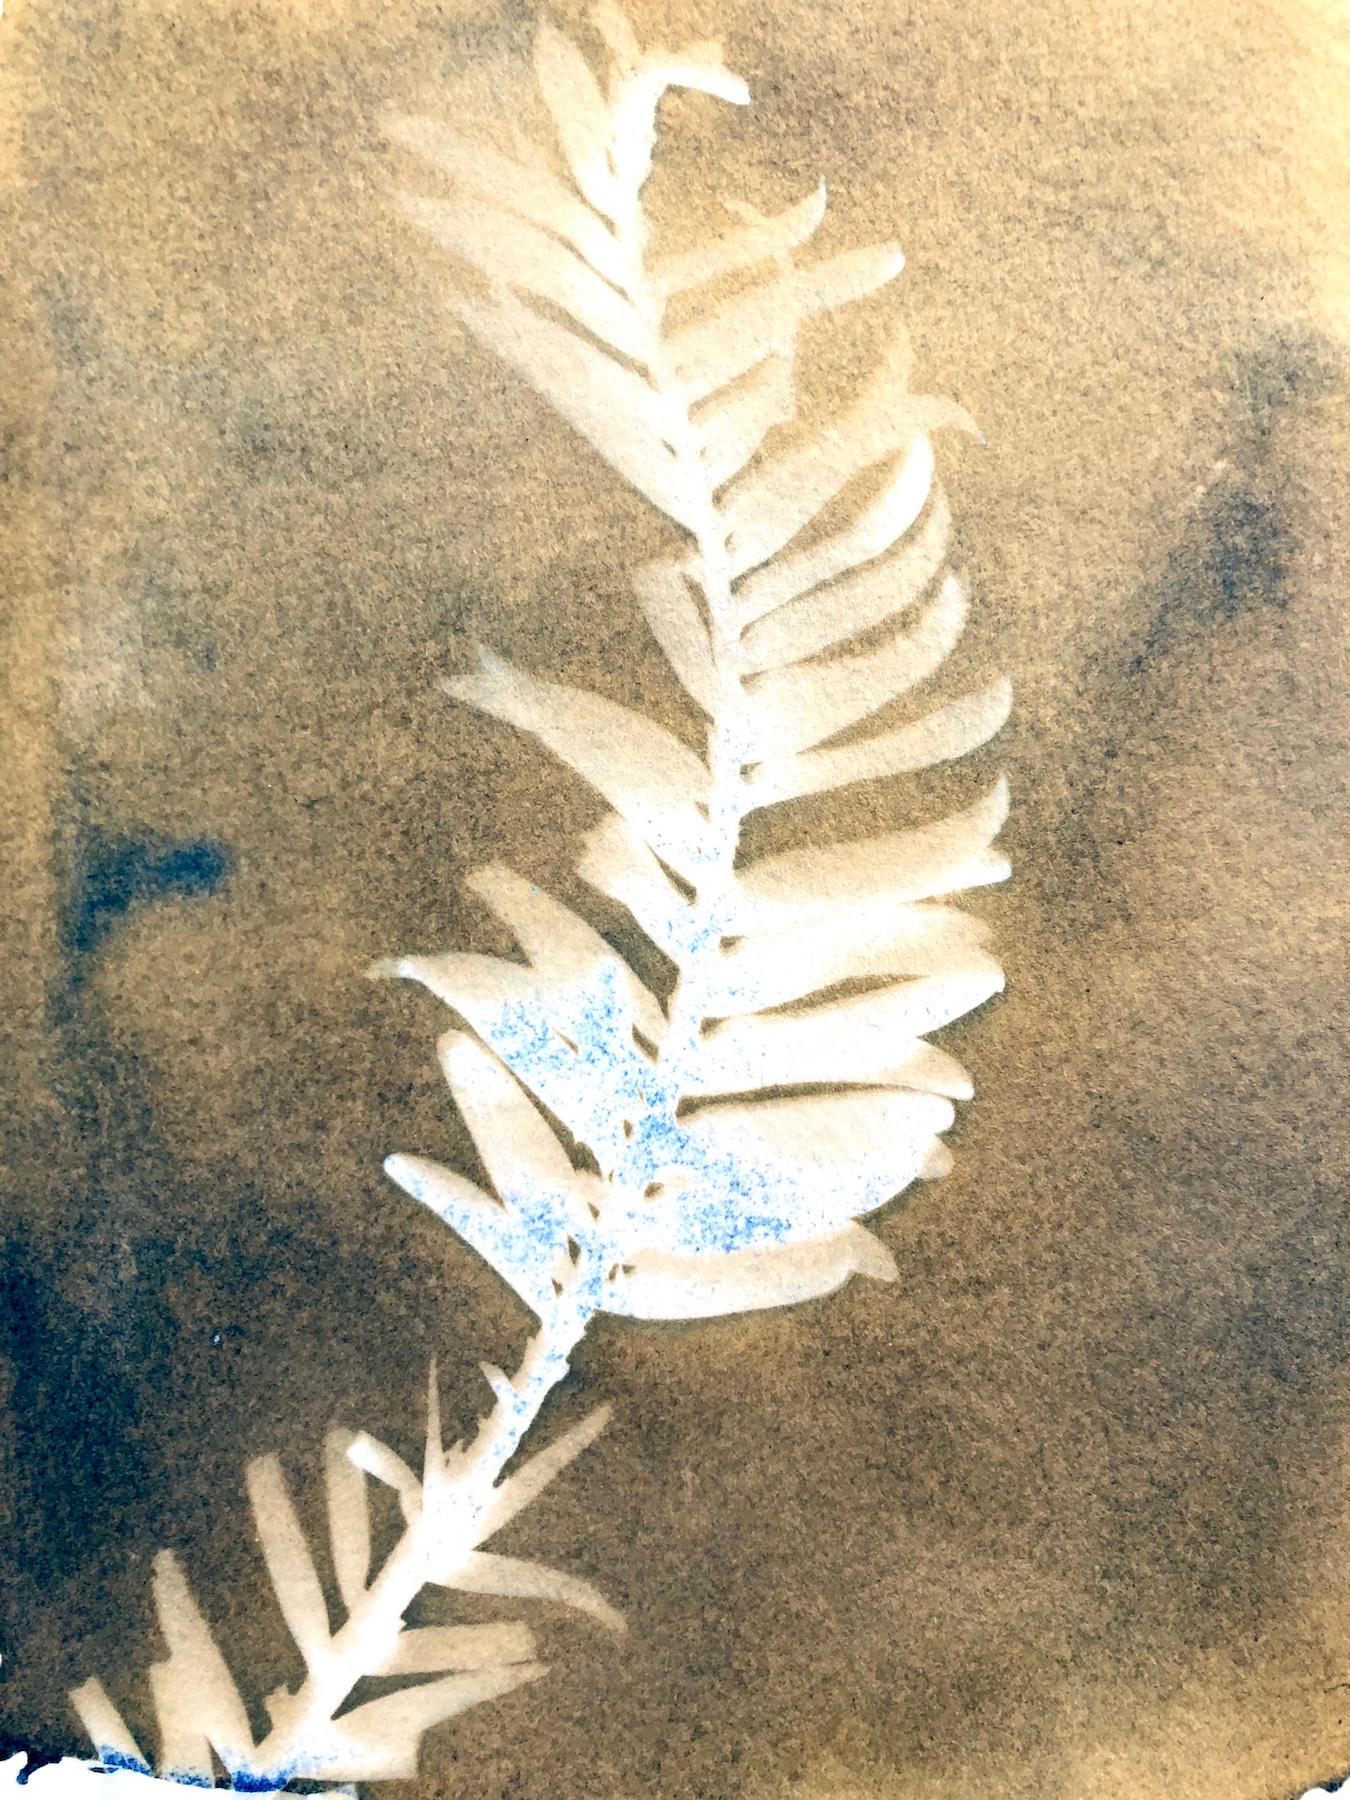 "Wolemi Pine 2", contemporary, yellow, trees, forests, cyanotype, photograph